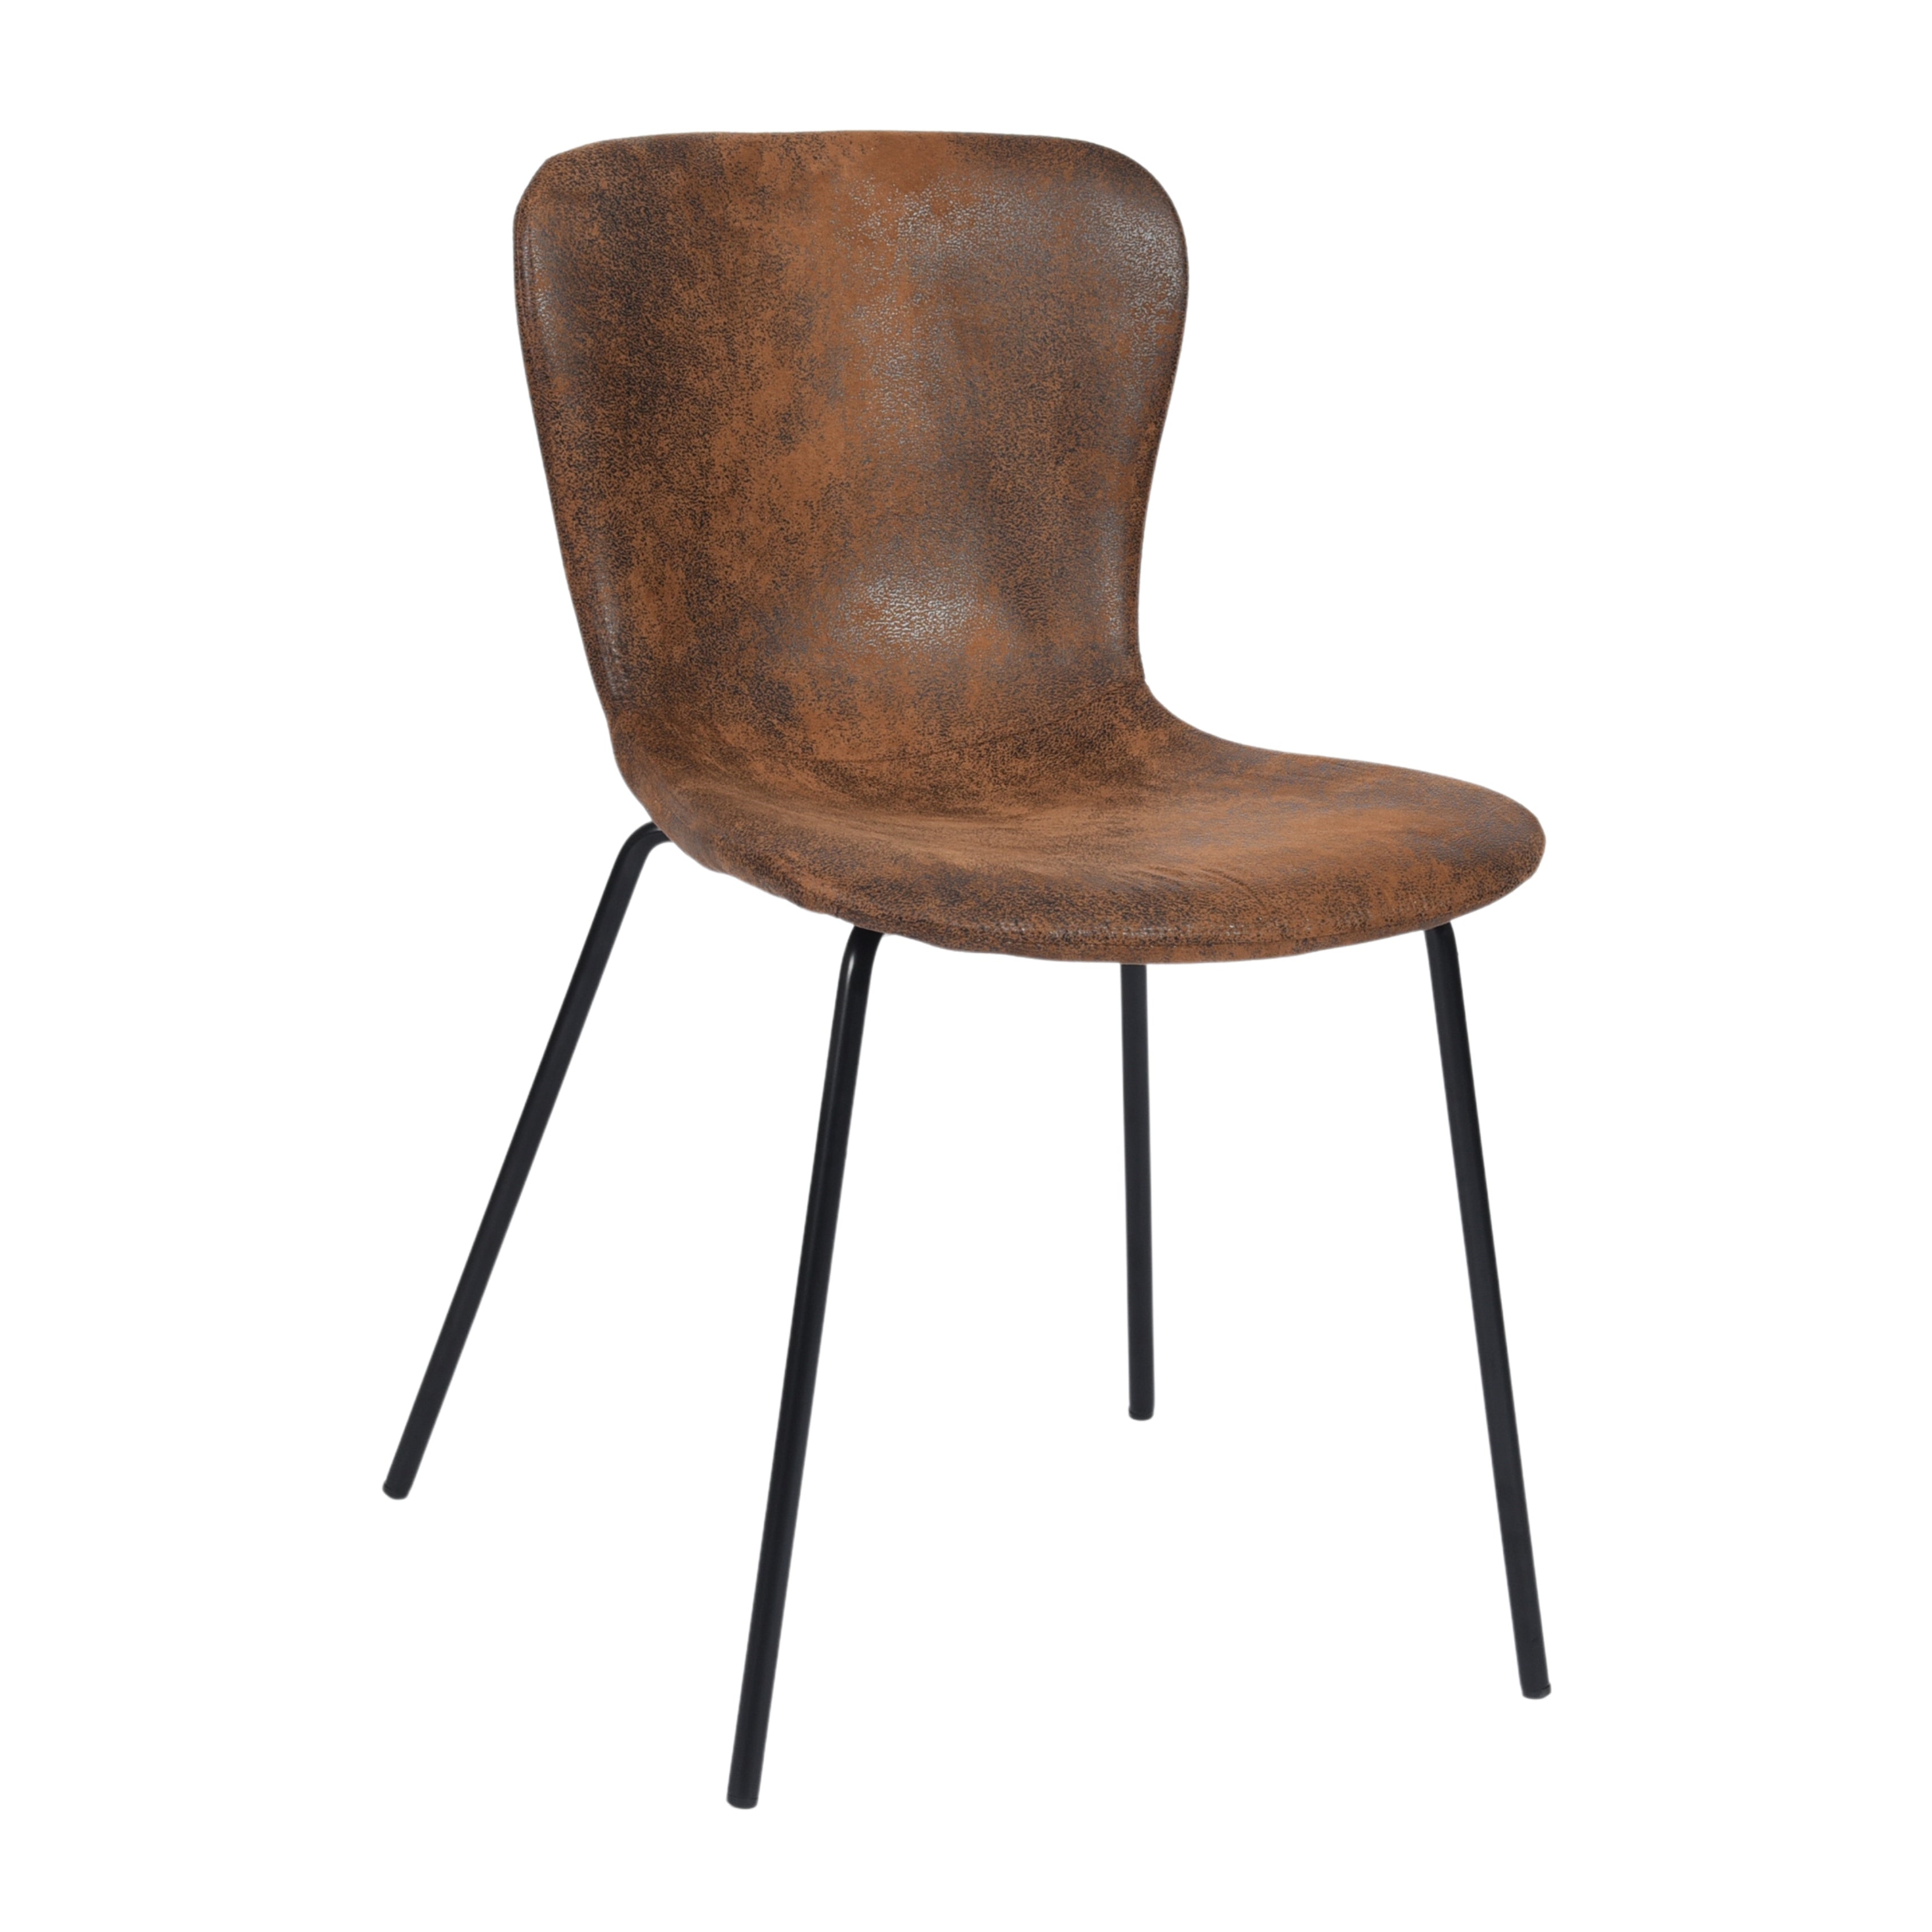 Koziello Suede Black Legs Dining Chairs